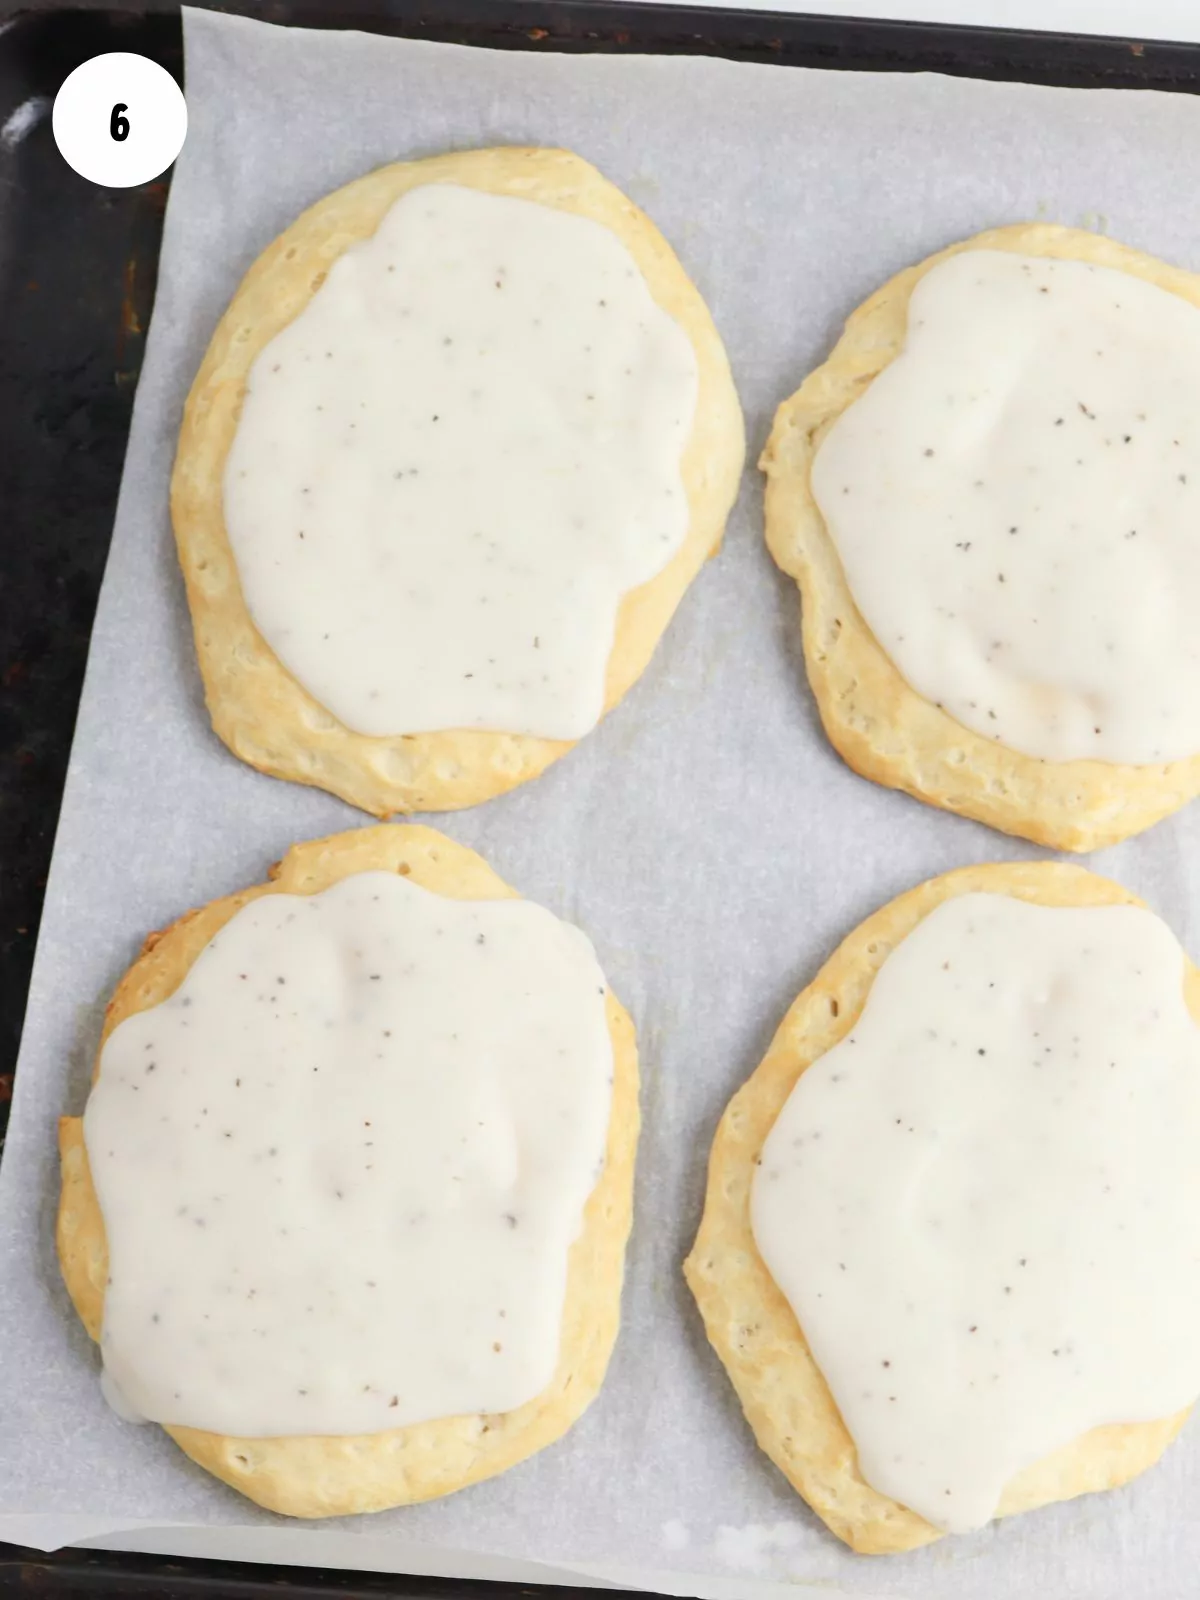 white gravy spread on baked biscuits